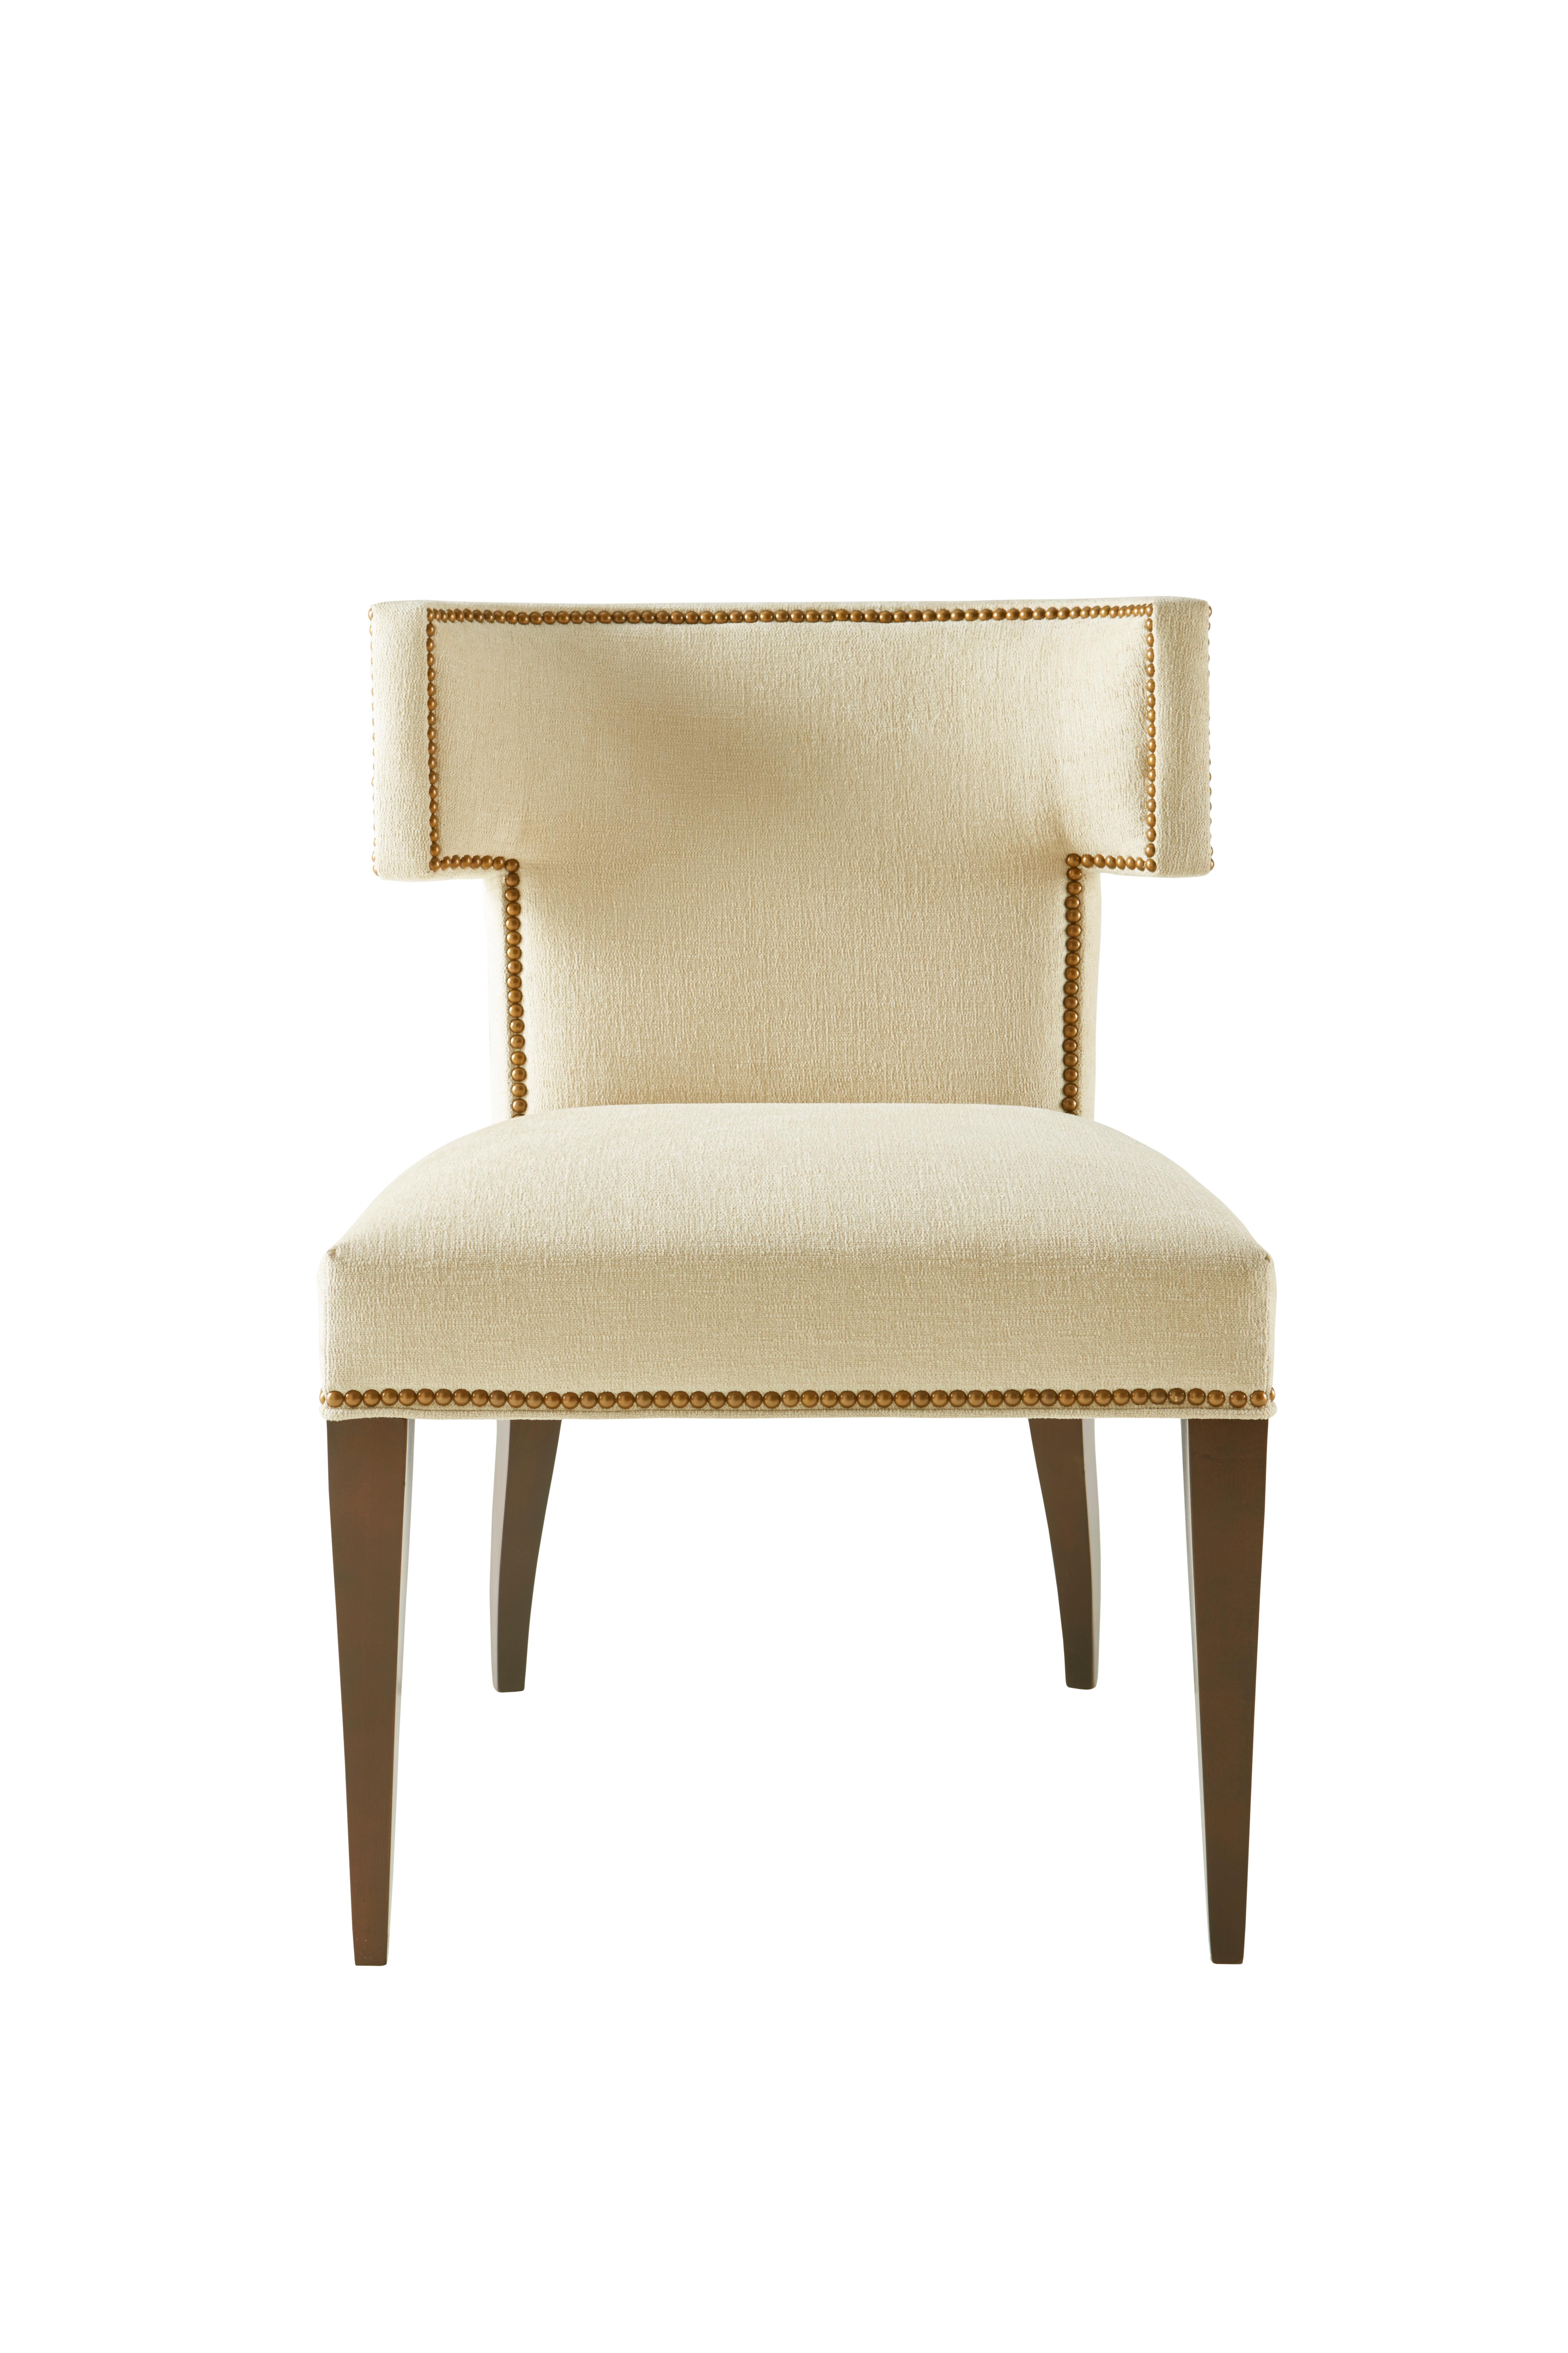 Hotchkiss side dining chair (PL306) is upholstered in Kravet's 34622-116 Crypton Home fabric with Walnut wood stain and features French Natural #9 nailhead trim. Made in the USA.

Ready to ship.